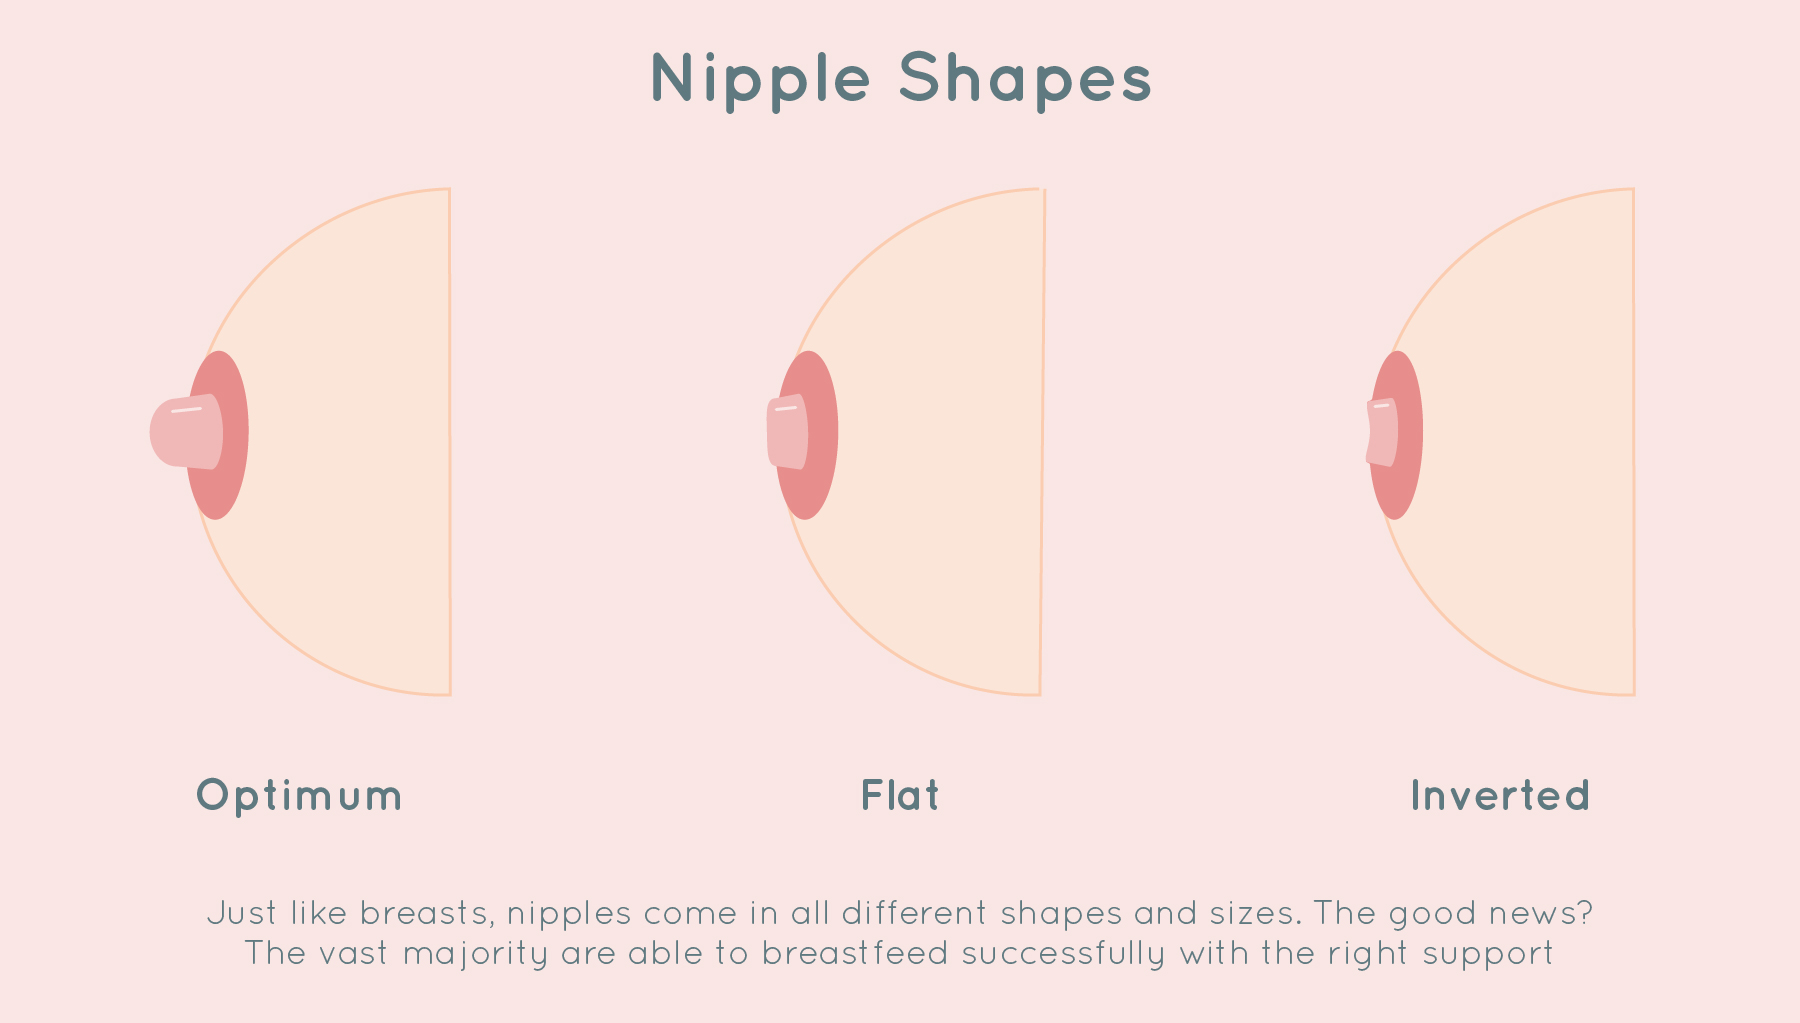 Nipple Shapes Optimum Flat Inverted. Just like breasts, nipples come in all different shapes and sizes. The good news? The vast majority are able to breastfeed successfully with the right support